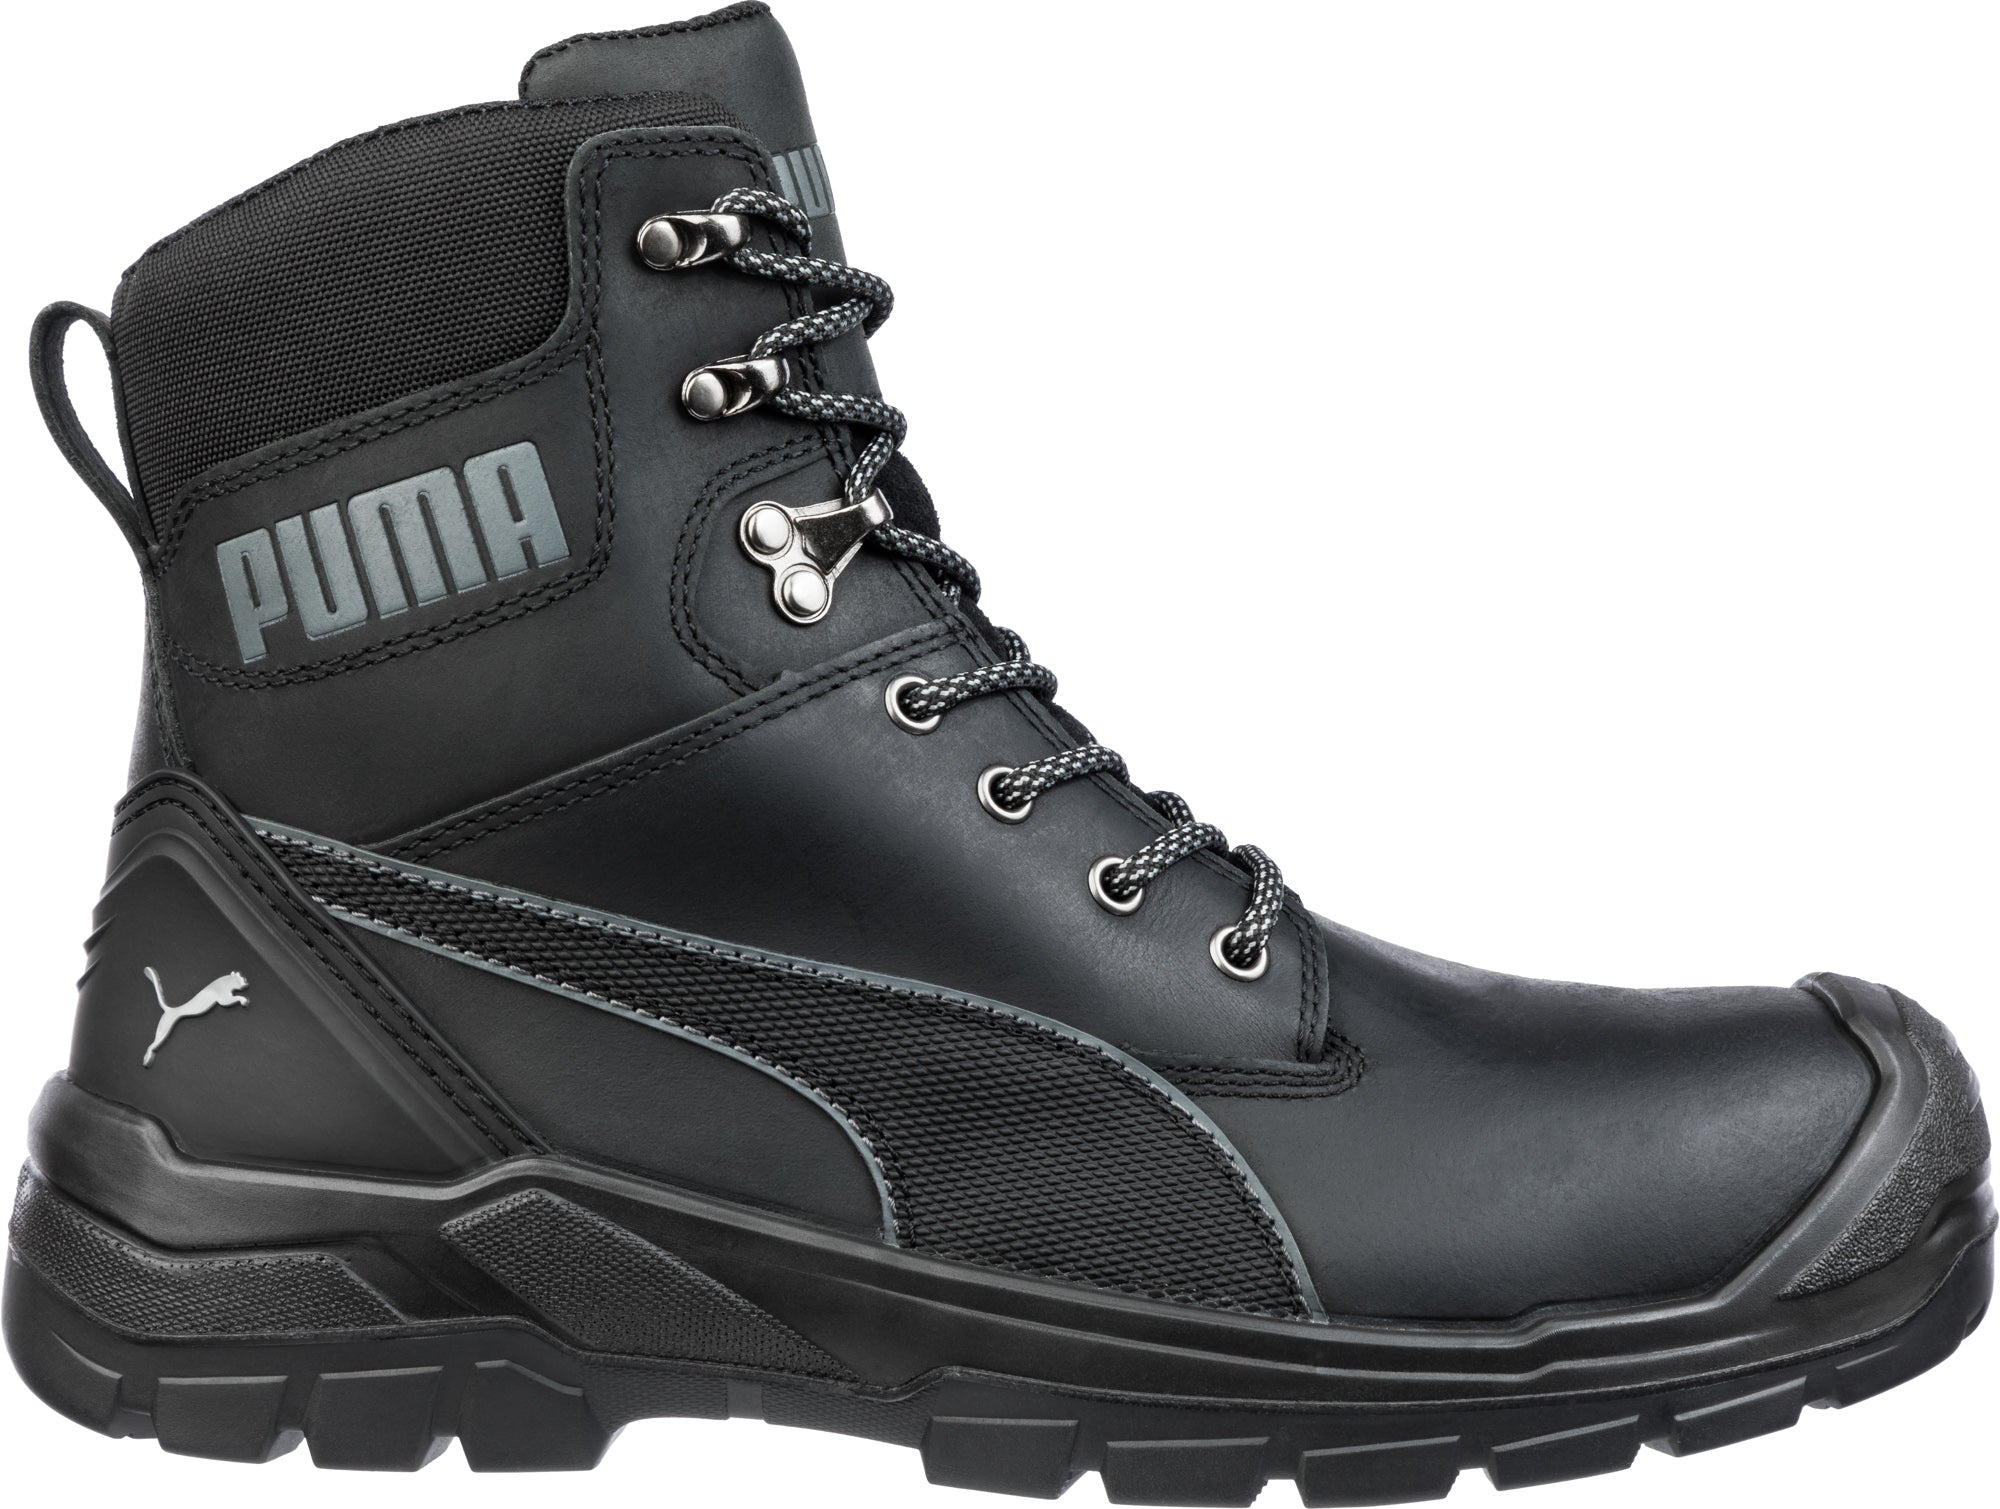 Puma Safety Mens Leather Conquest CTX WP CT Lace-Up Work Boo – The Western Company